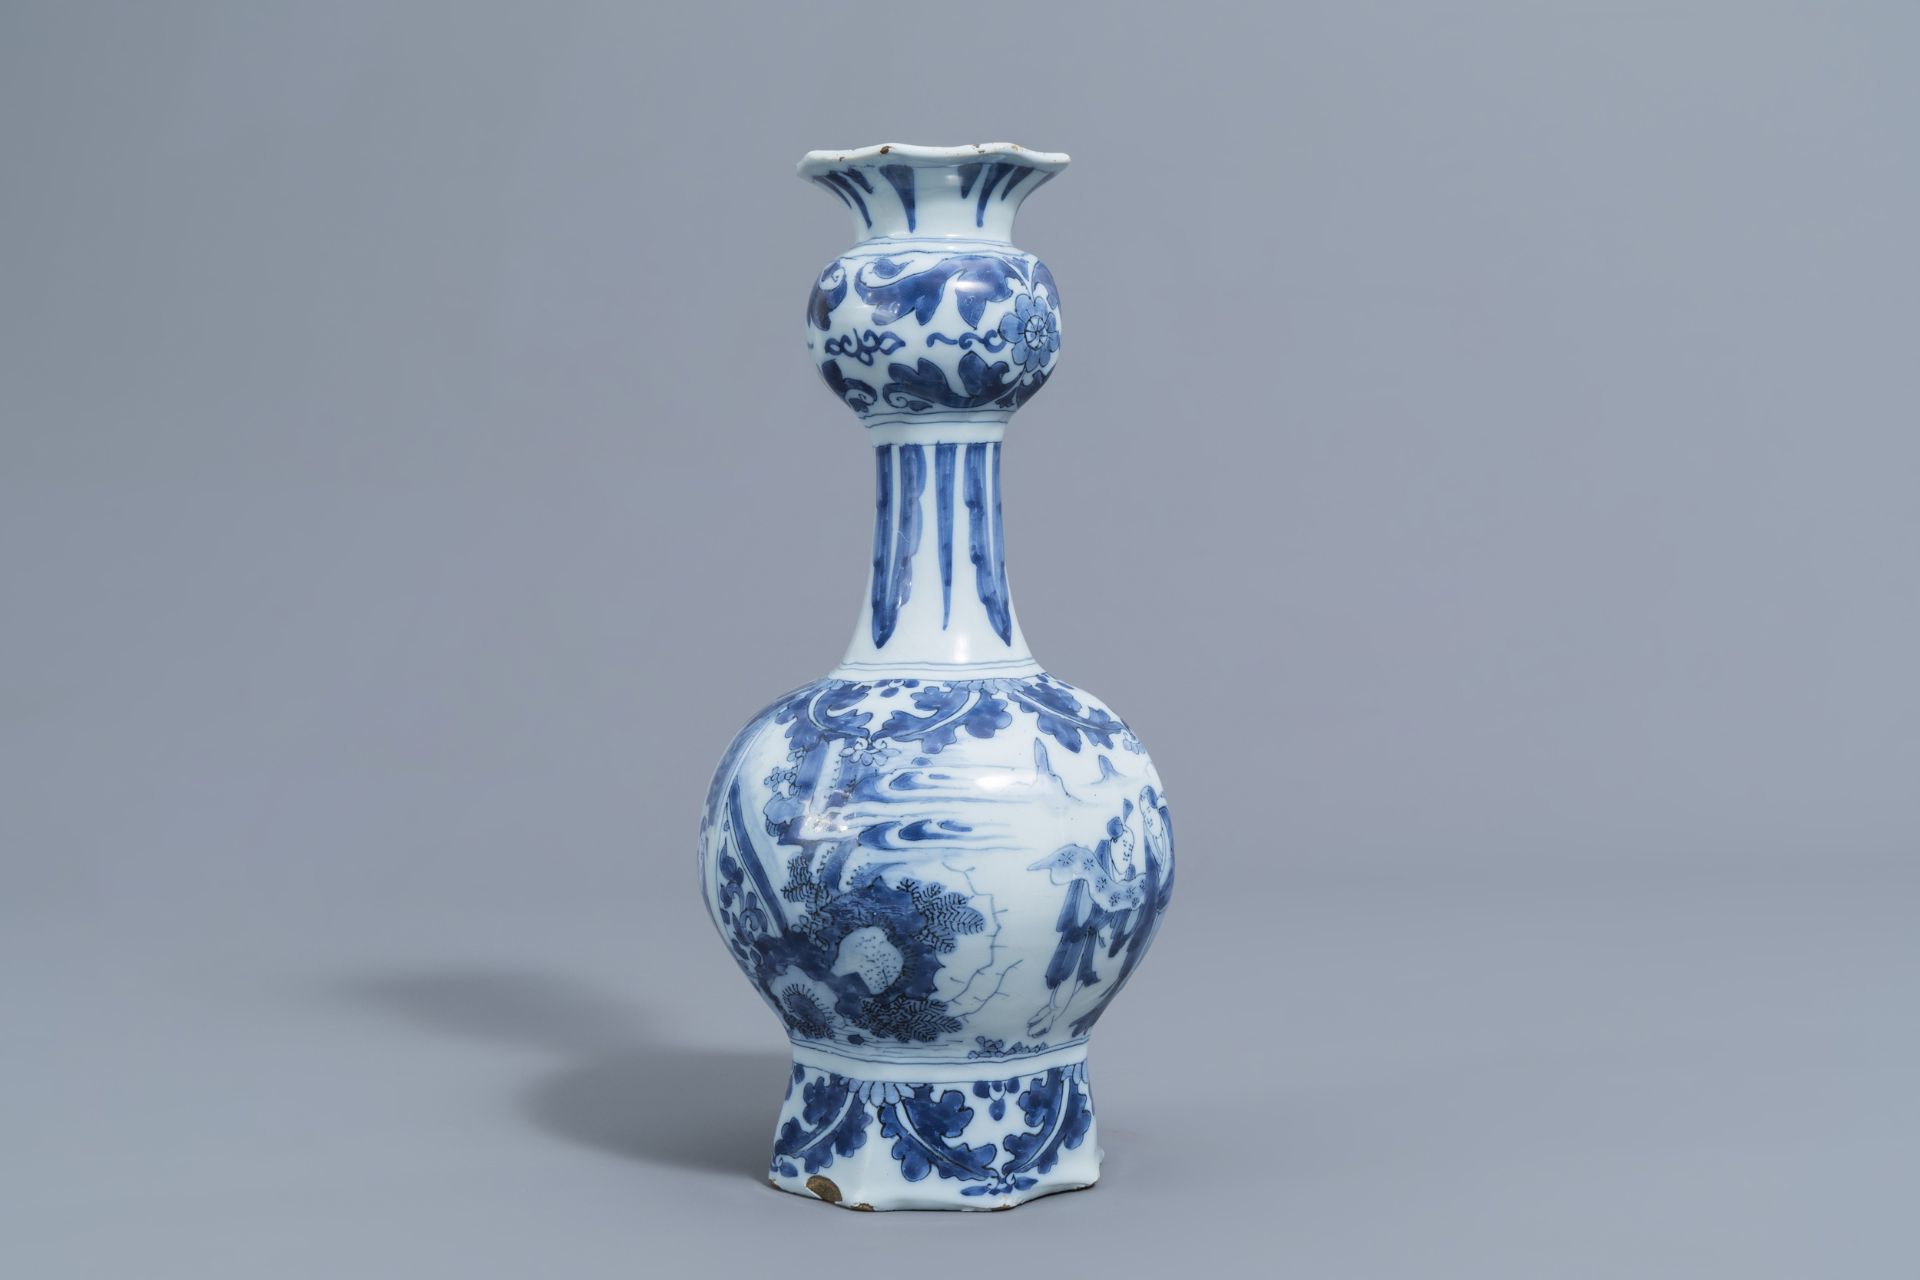 A Dutch Delft blue and white 'chinoiserie' garlic neck bottle vase, late 17th C. - Image 4 of 6